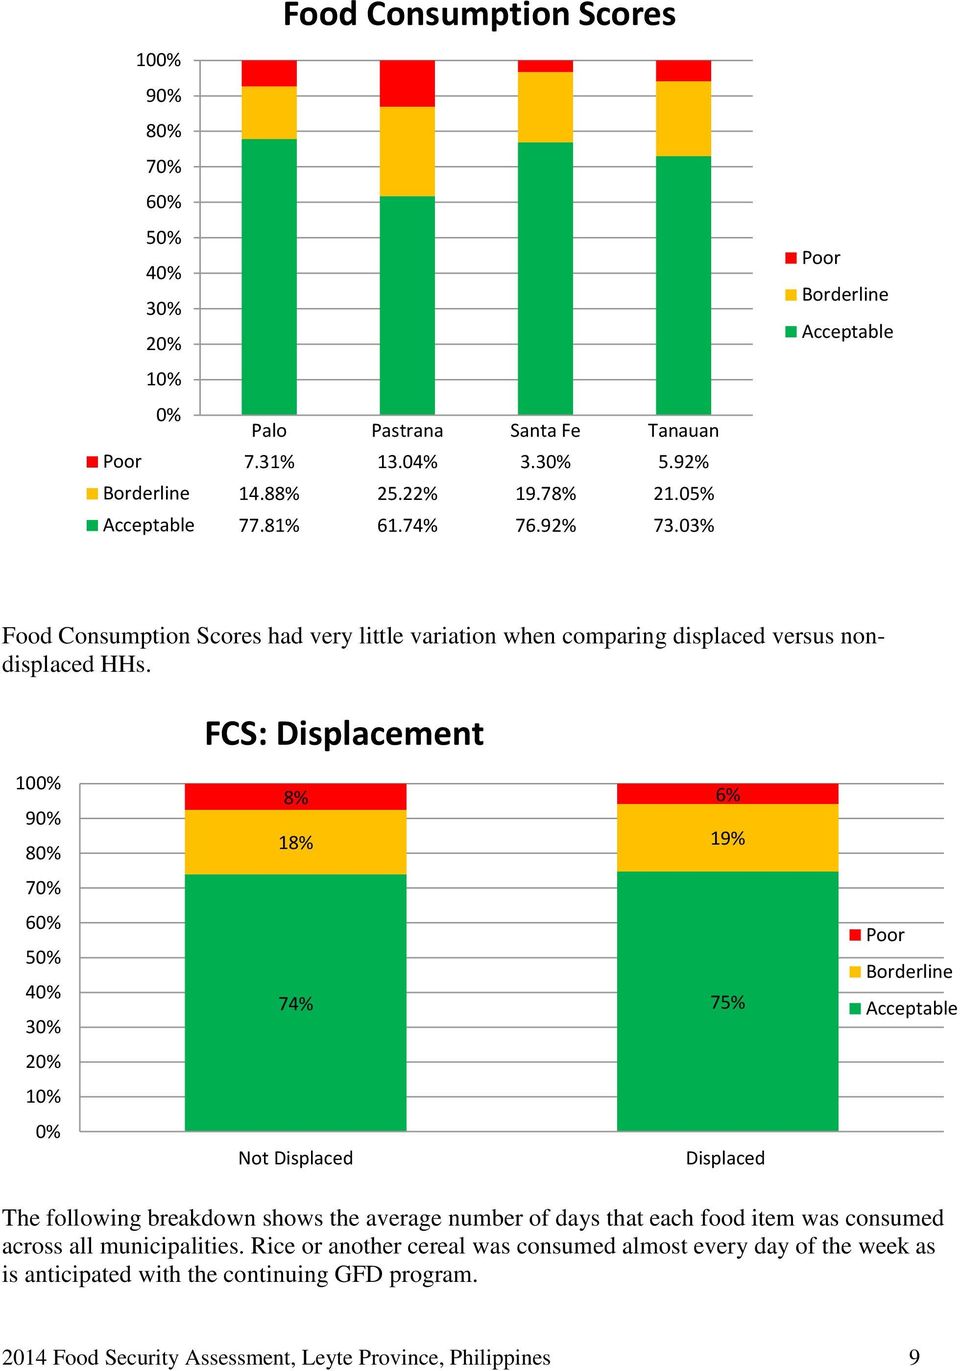 FCS: Displacement 100% 90% 80% 70% 60% 50% 40% 30% 20% 10% 0% 8% 6% 18% 19% 74% 75% Not Displaced Displaced Poor Borderline Acceptable The following breakdown shows the average number of